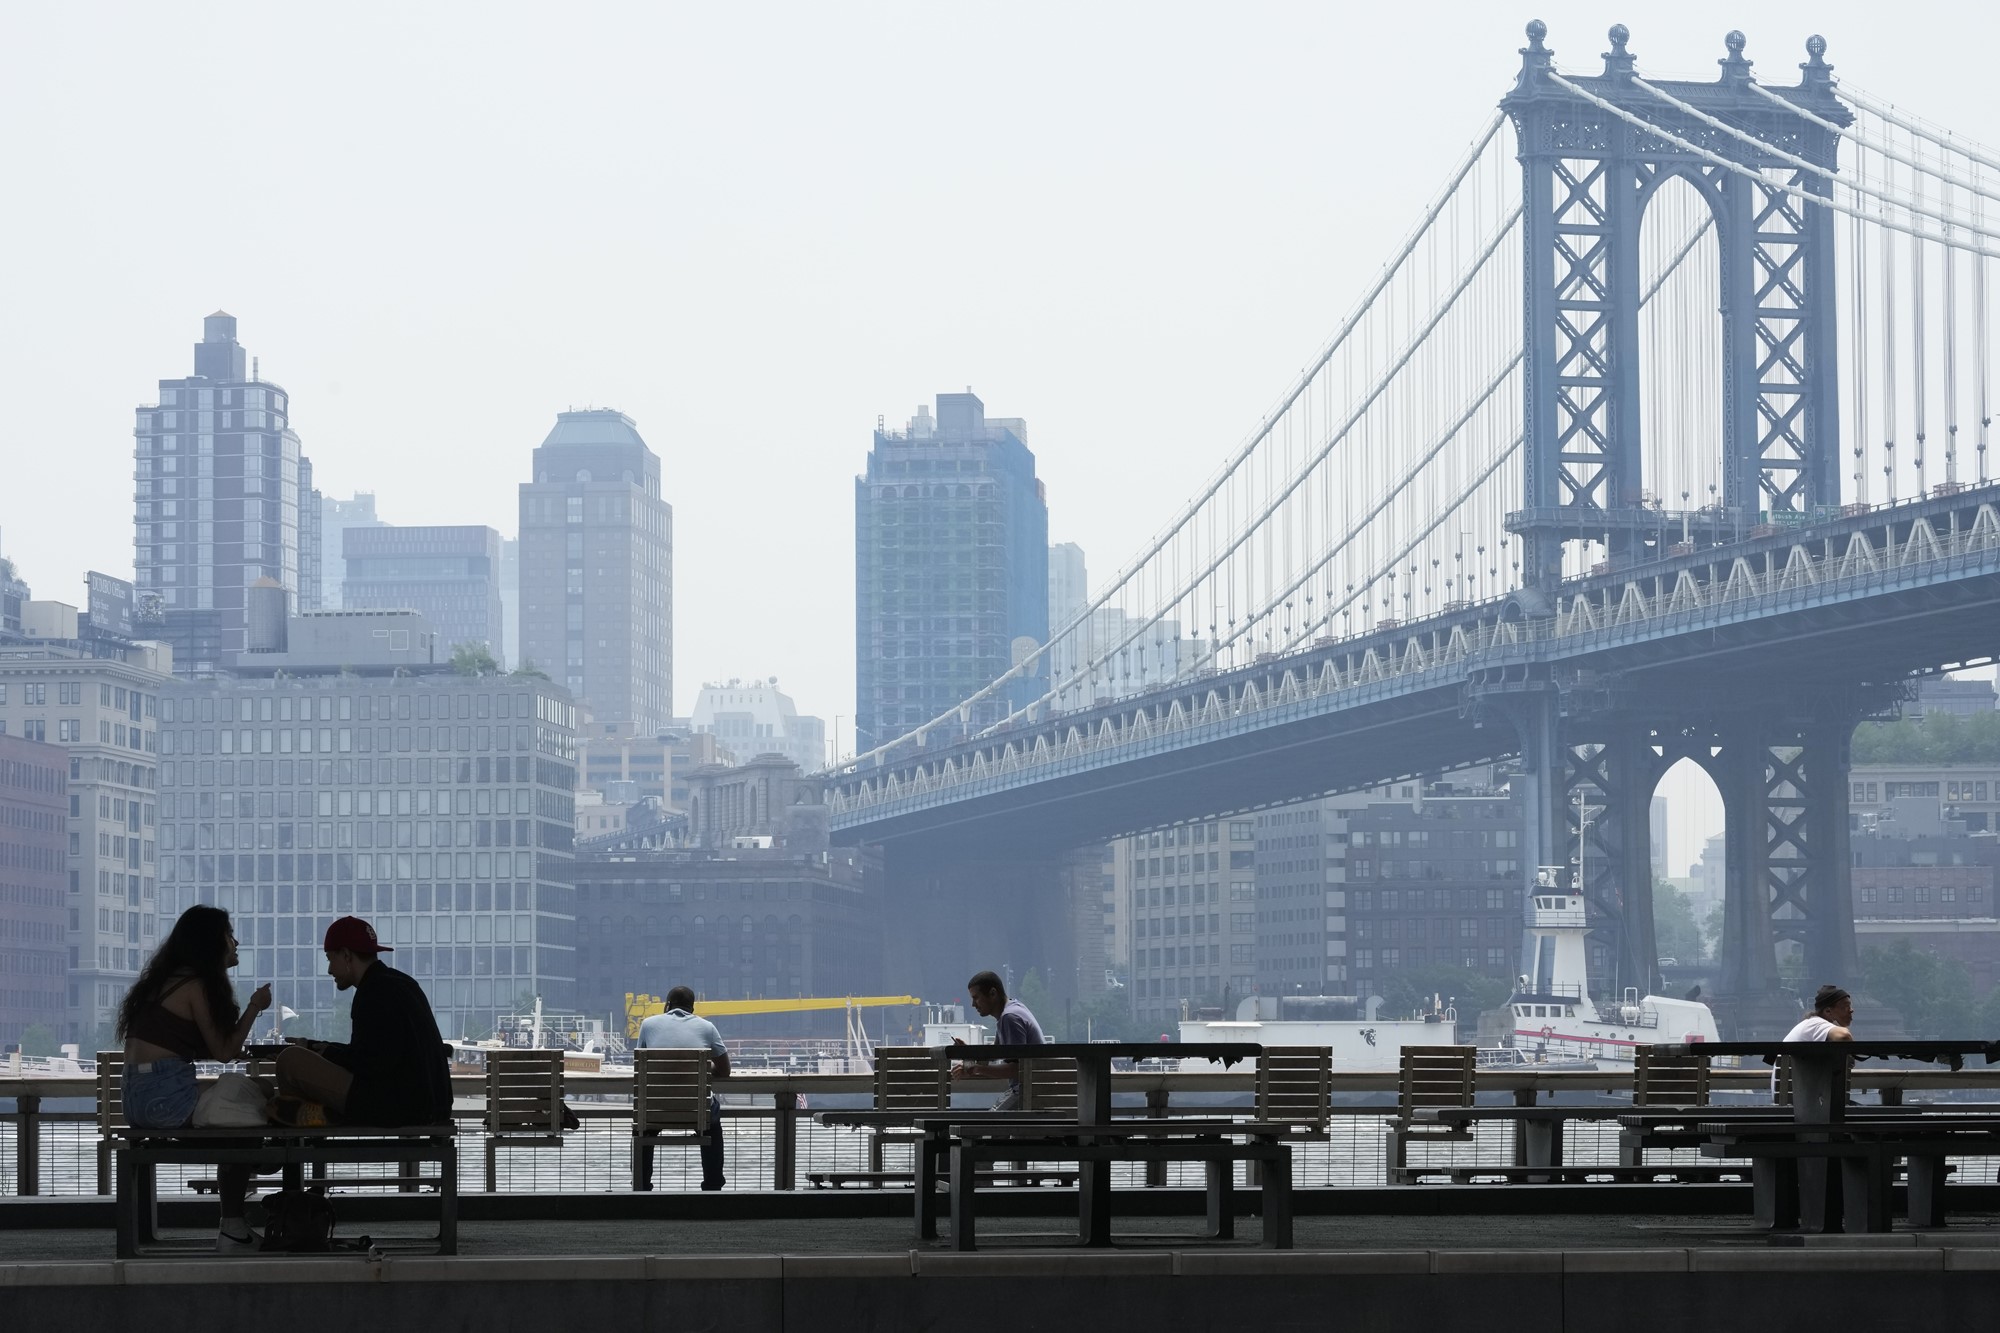 People on the East River promenade are framed by the hazy Brooklyn waterfront skyline and the Manhattan bridge